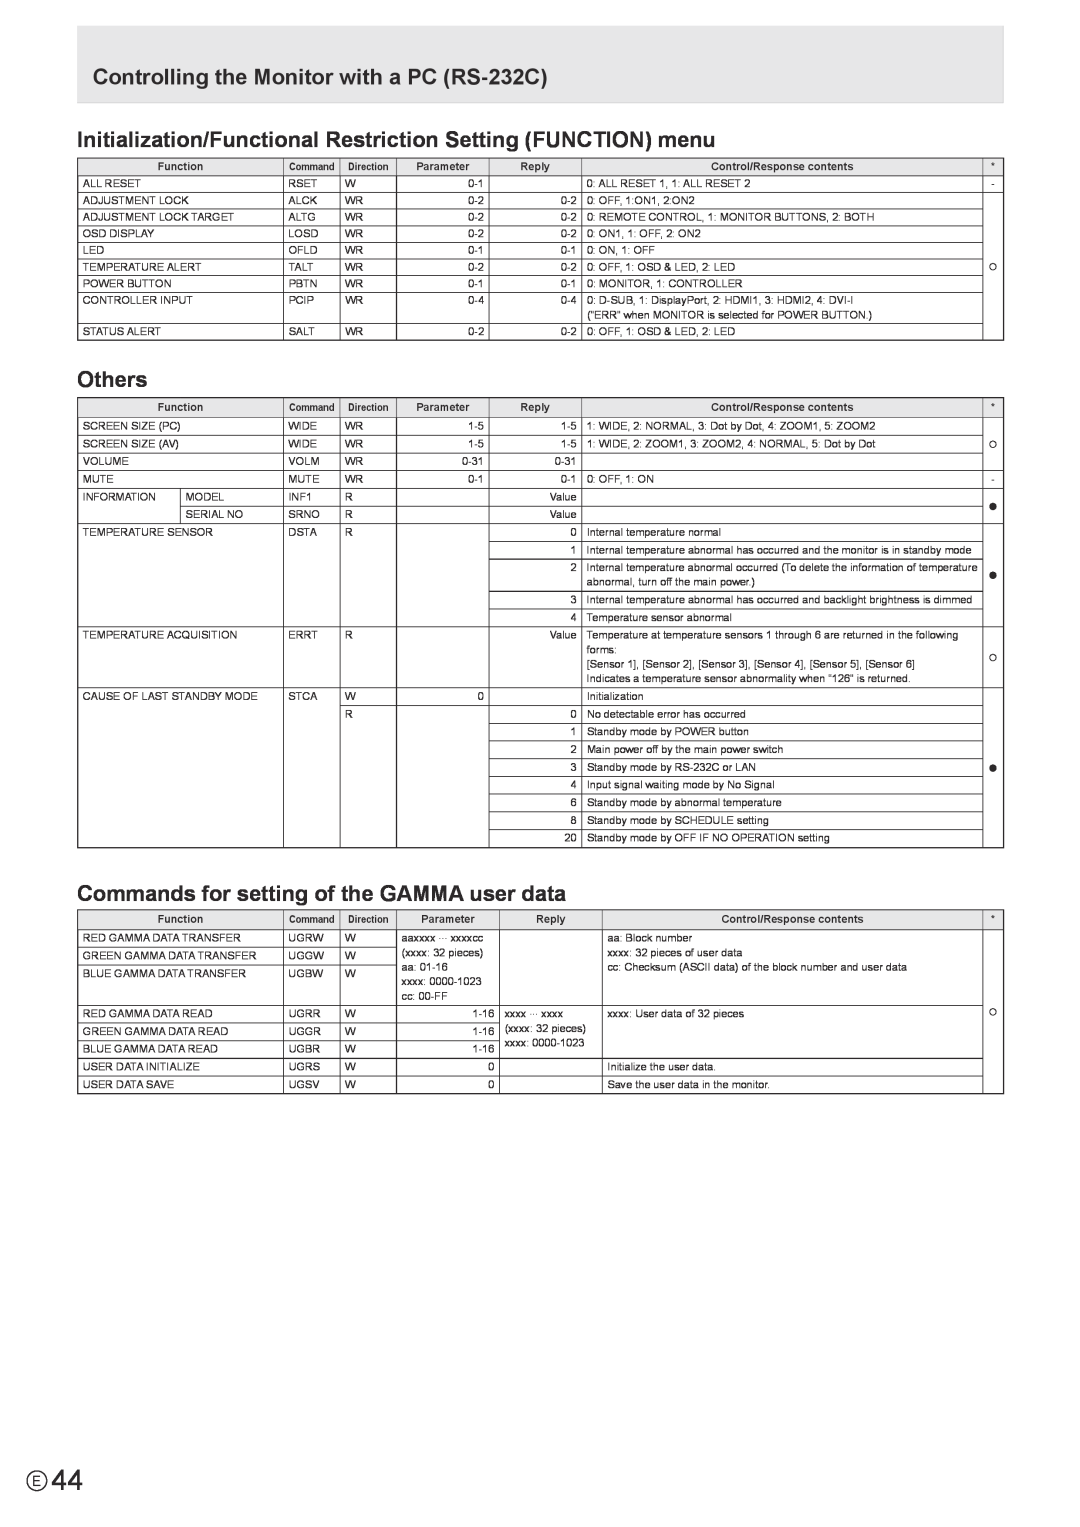 Sharp PN-R603, PN-R703 operation manual Initialization/Functional Restriction Setting FUNCTION menu, Others 